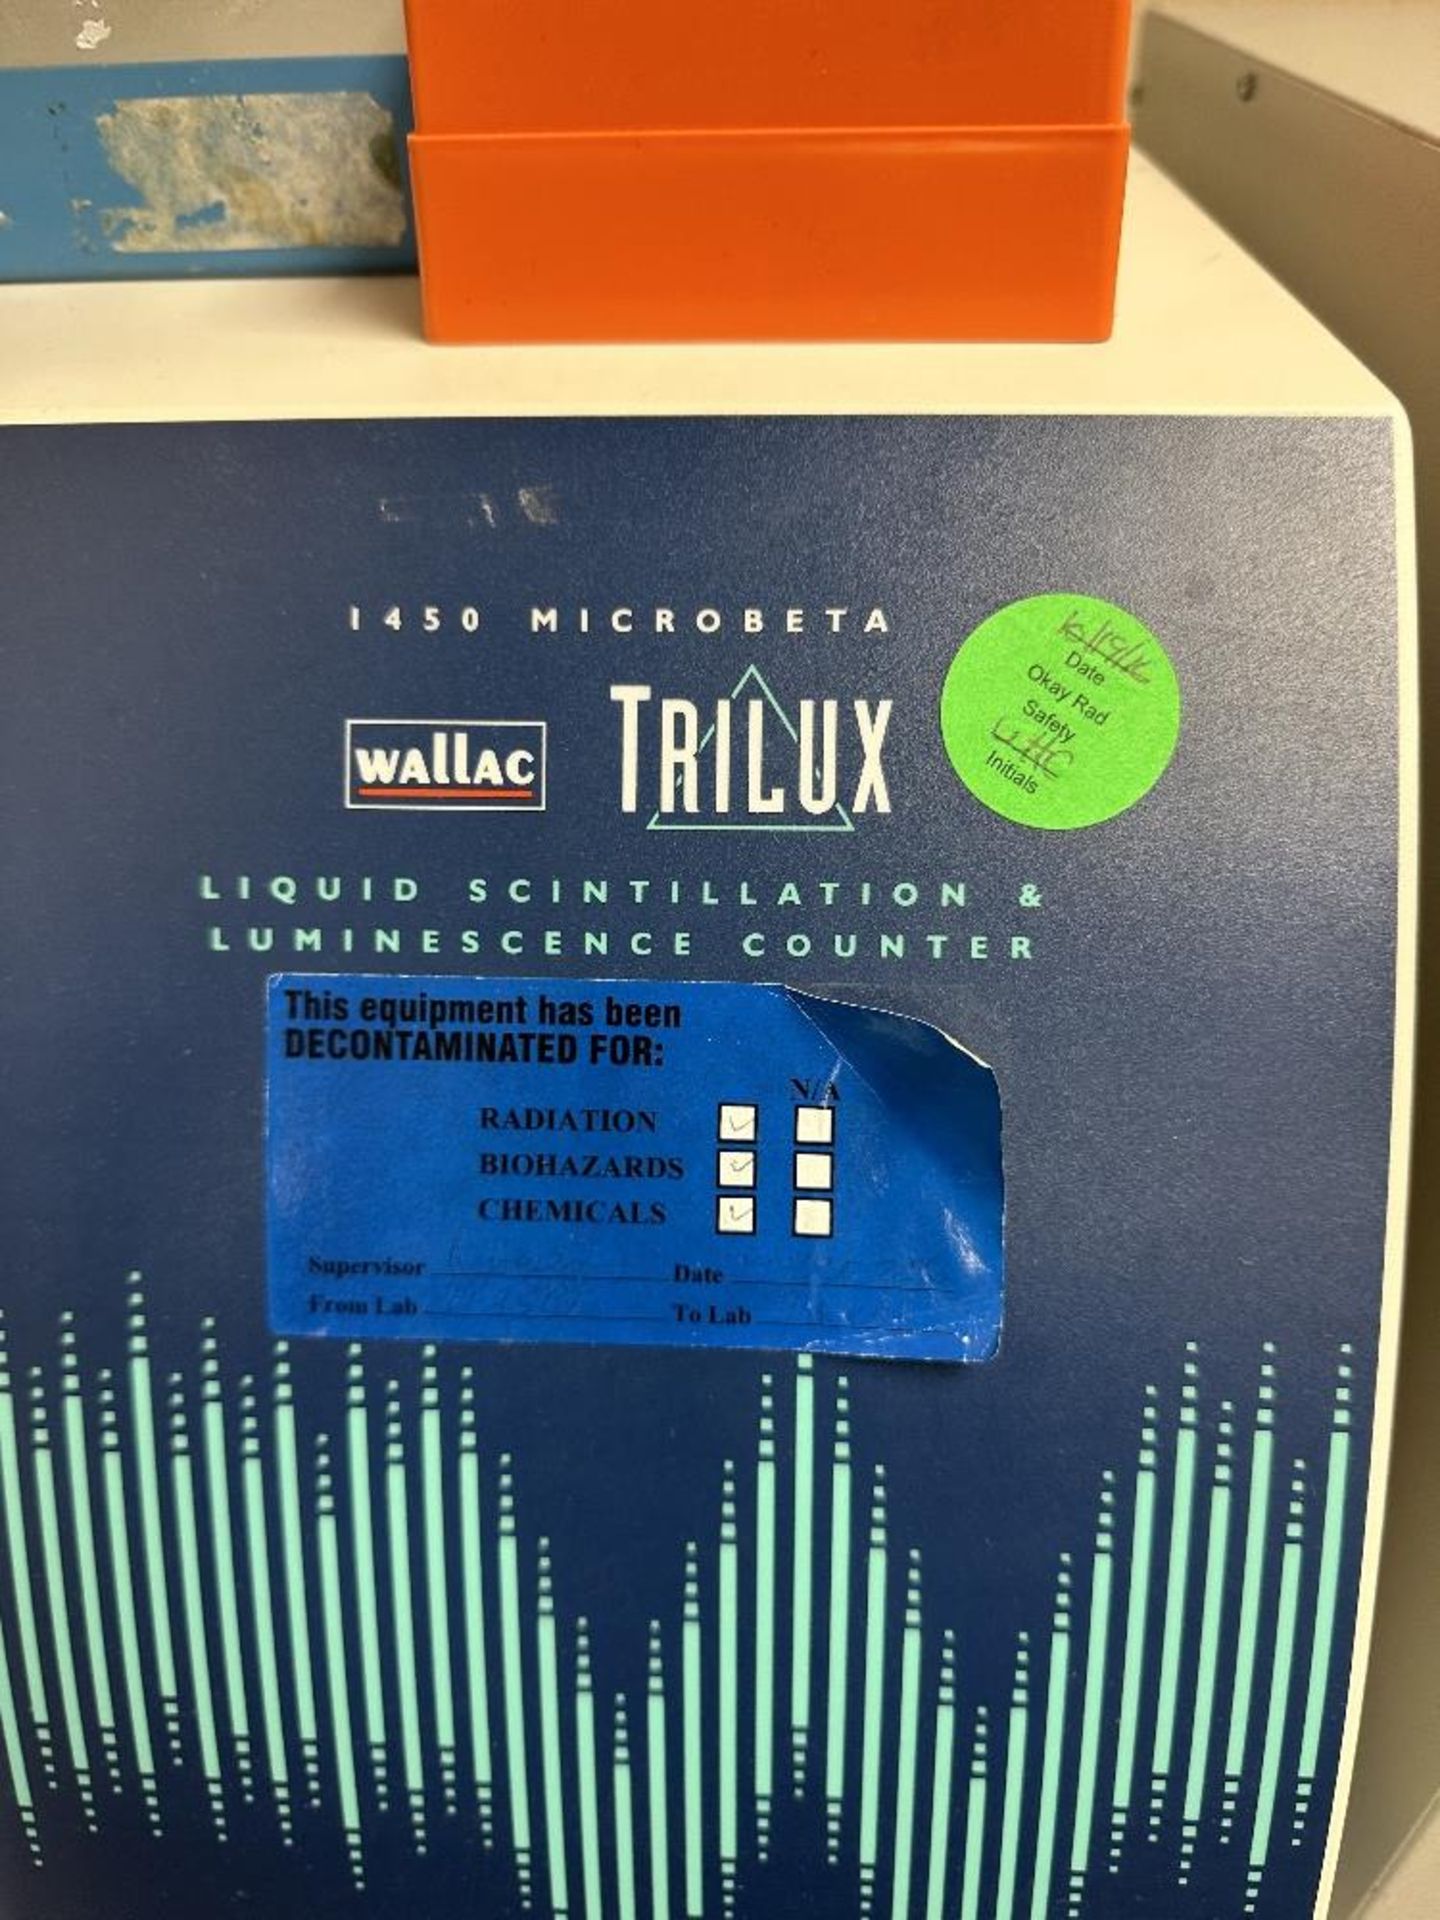 Wallac 1450 MicroBeta TriLux Liquid Scintillation Counter (LOCATED IN MIDDLETOWN, N.Y.)-FOR - Image 2 of 7